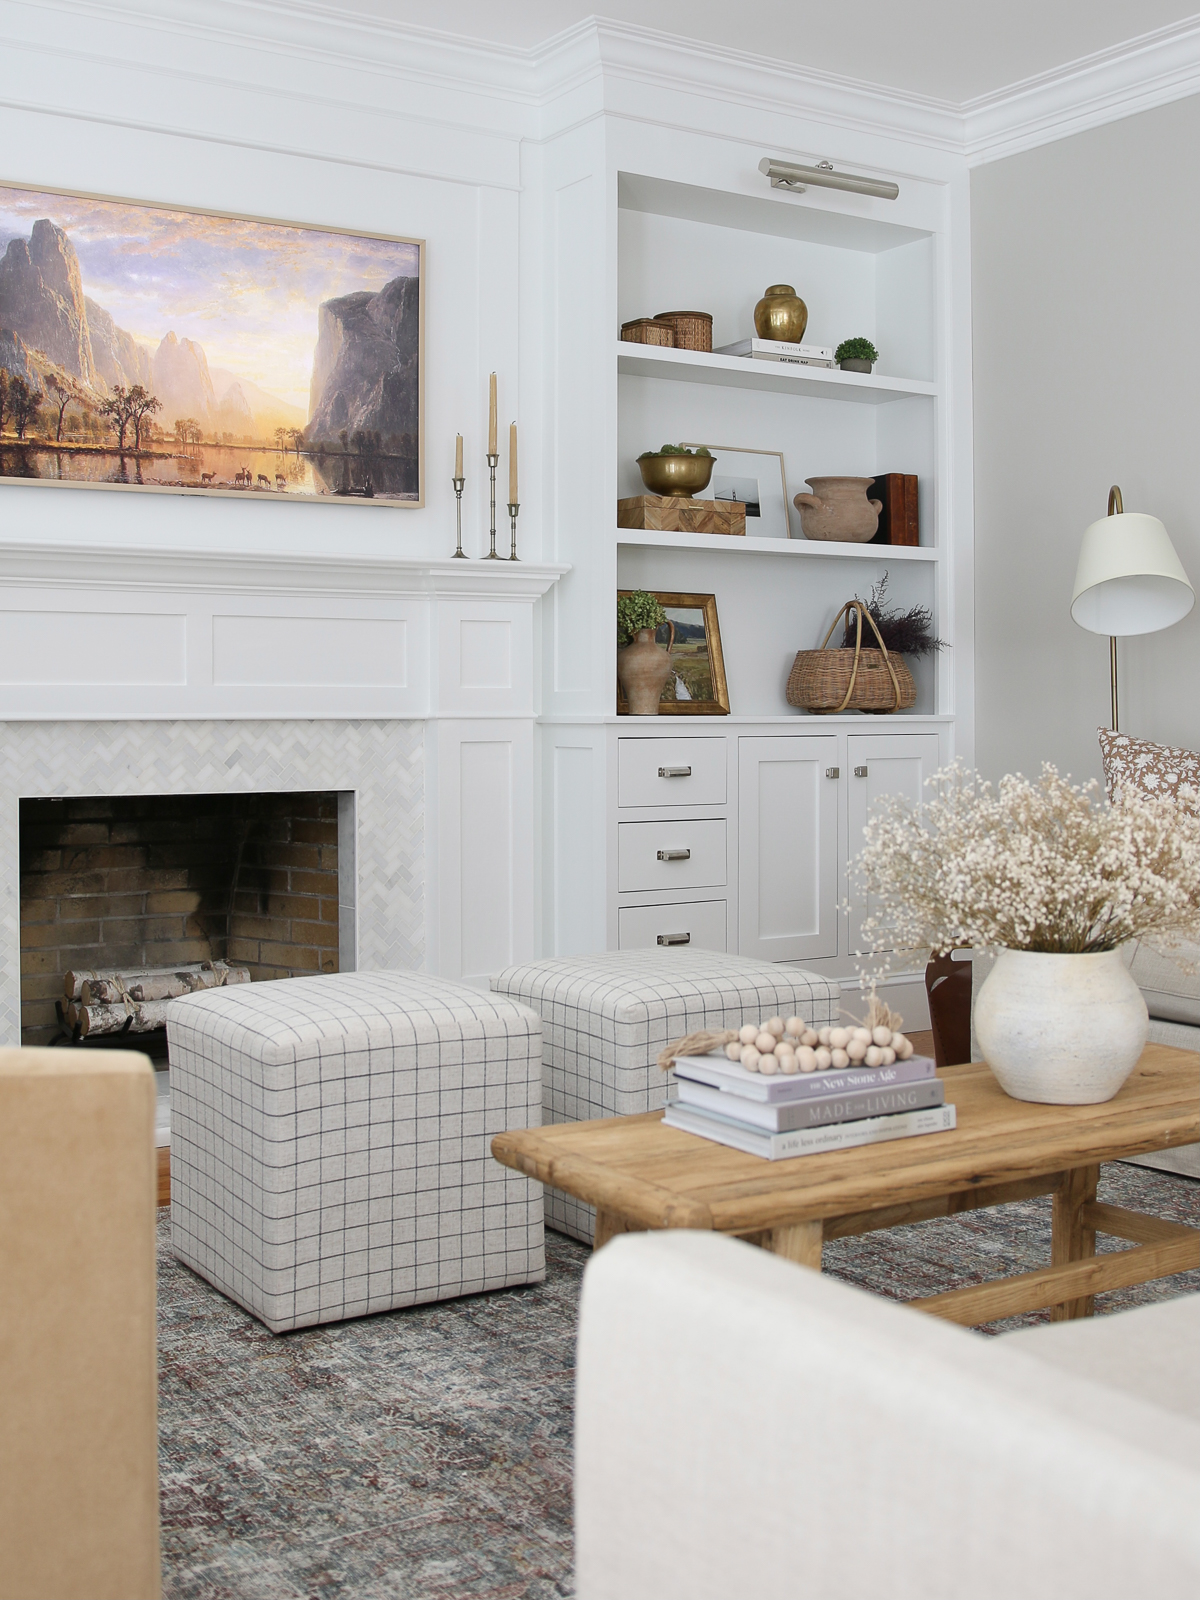 Frame TV above the fireplace with white builtin shelves on each side. Oriental rug with vintage wood coffee table